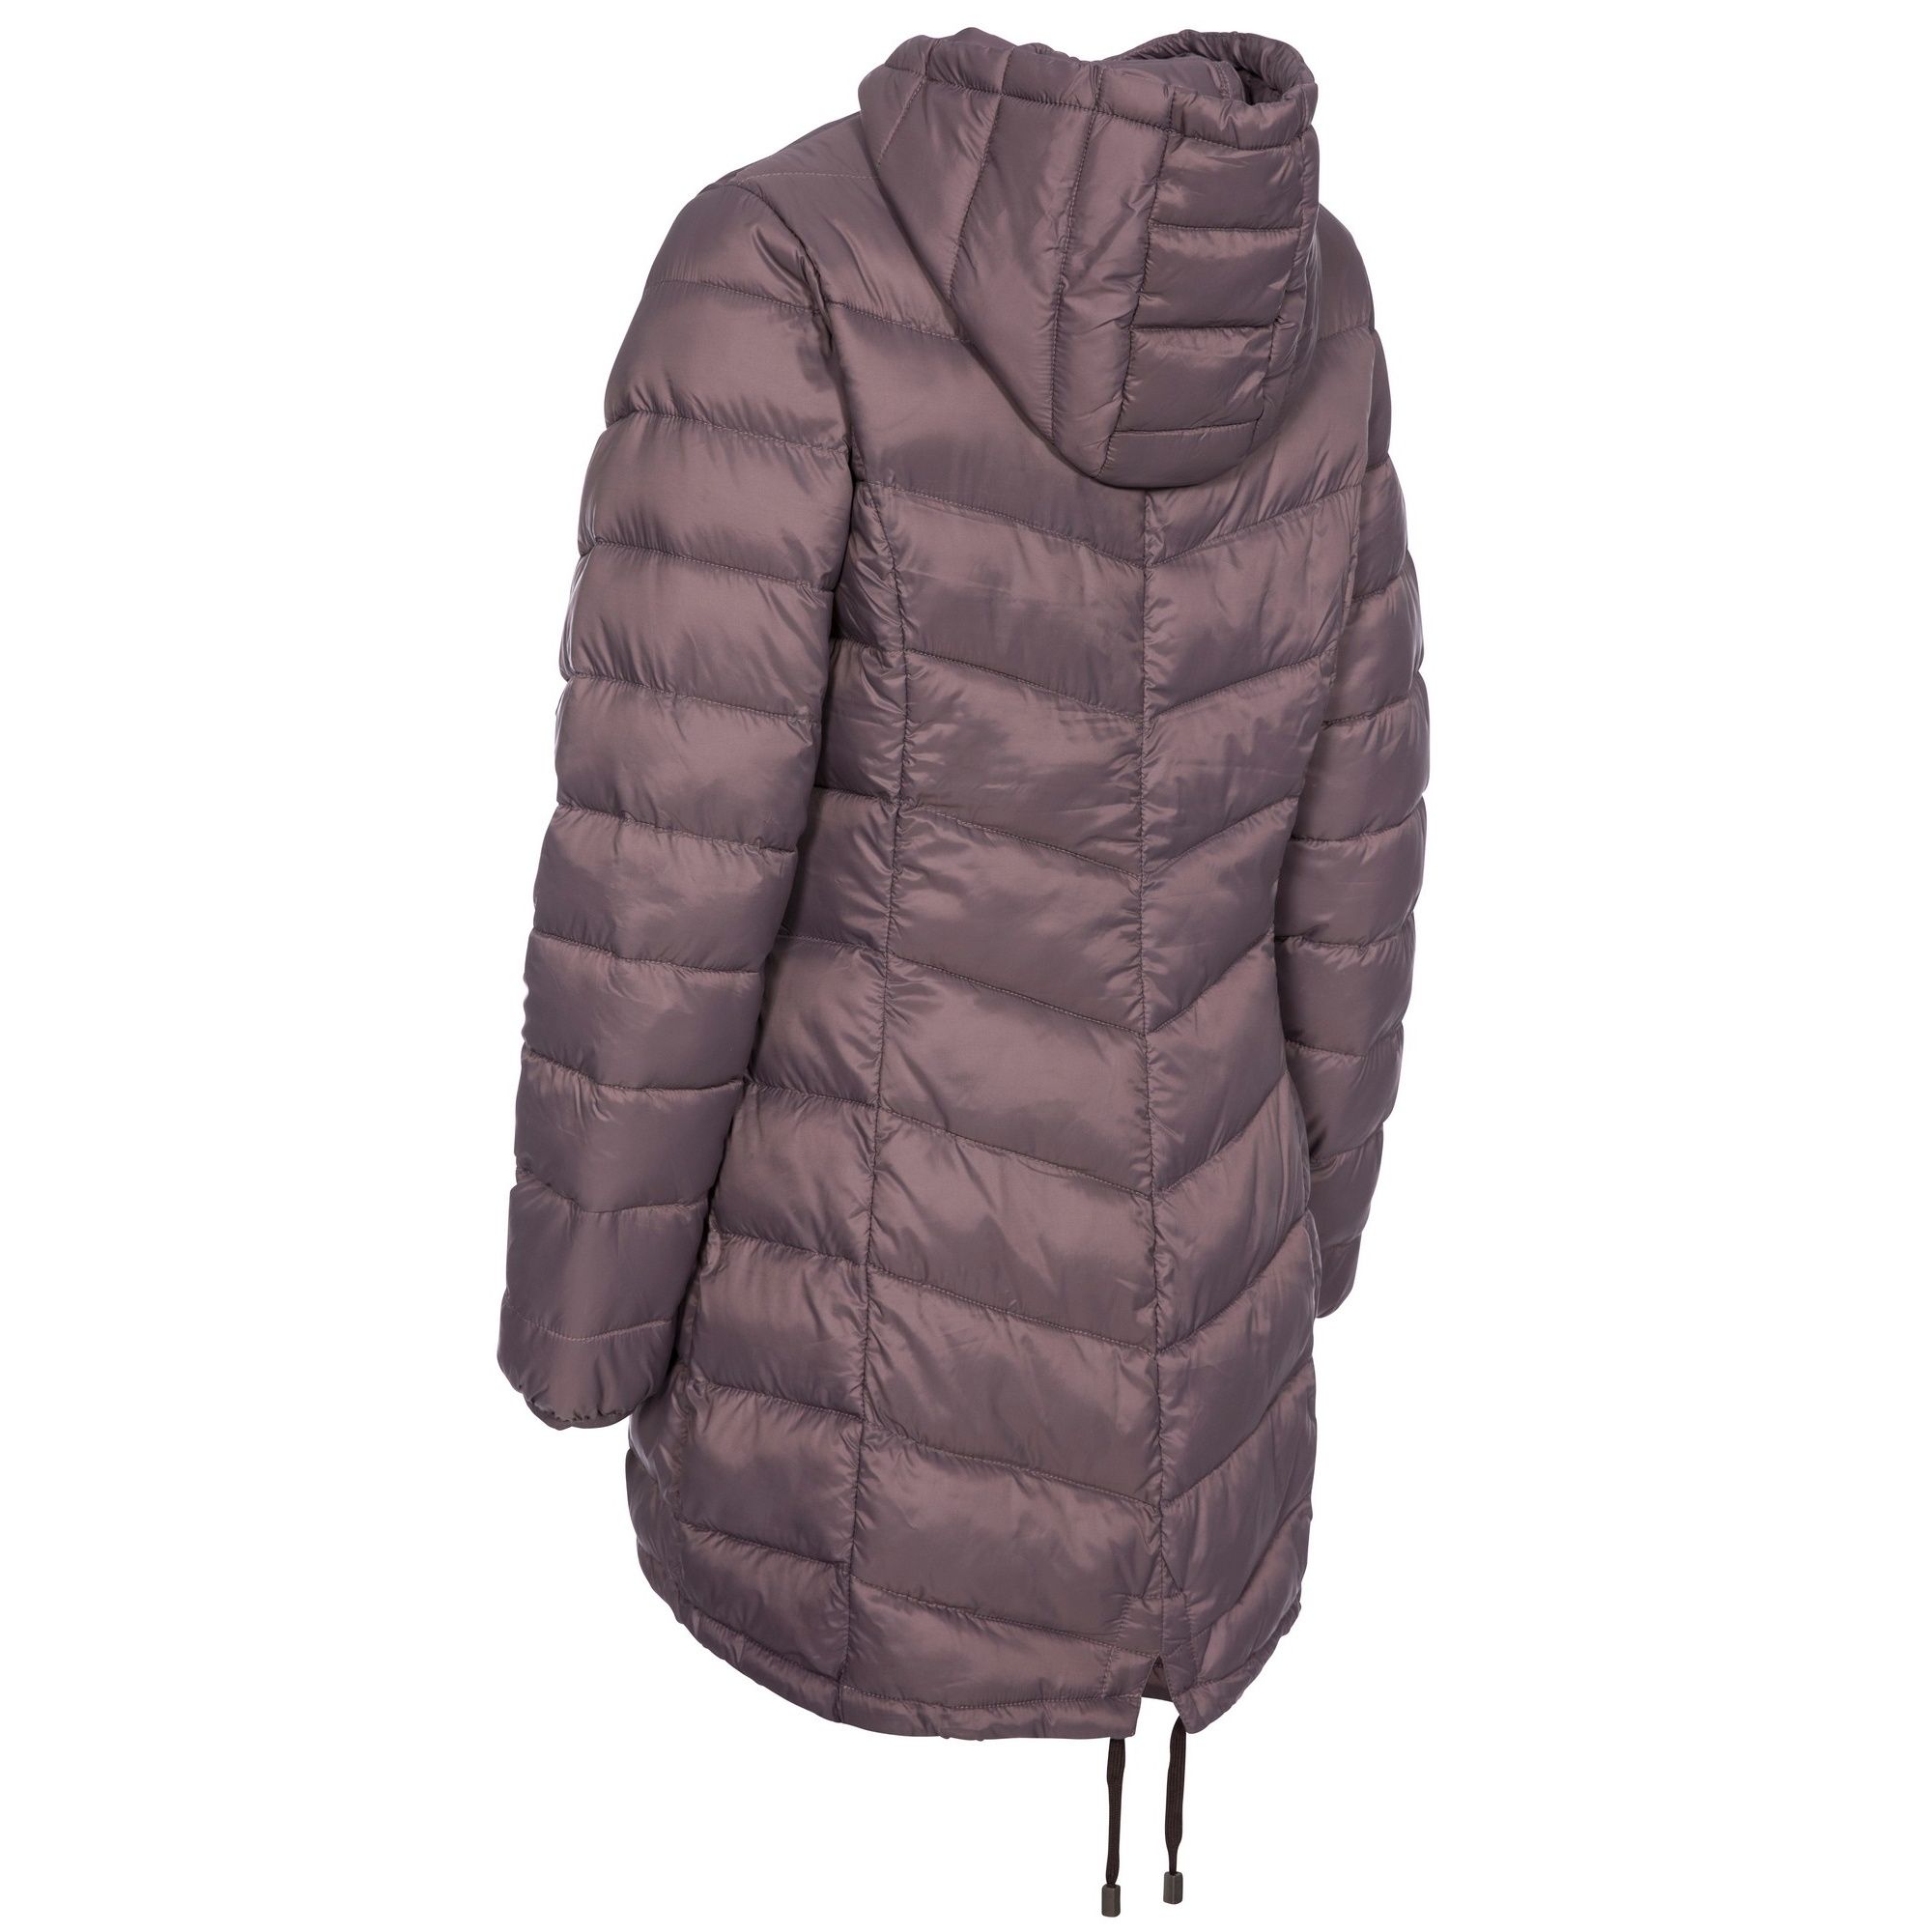 Ultra lightweight jacket. Grown on hood. 2 zip pockets. Downtouch padding. Elasticated cuffs. Inner storm flap. Shell: 100% Polyamide, Lining: 100% Polyamide, Filling: 100% Polyester. Trespass Womens Chest Sizing (approx): XS/8 - 32in/81cm, S/10 - 34in/86cm, M/12 - 36in/91.4cm, L/14 - 38in/96.5cm, XL/16 - 40in/101.5cm, XXL/18 - 42in/106.5cm.